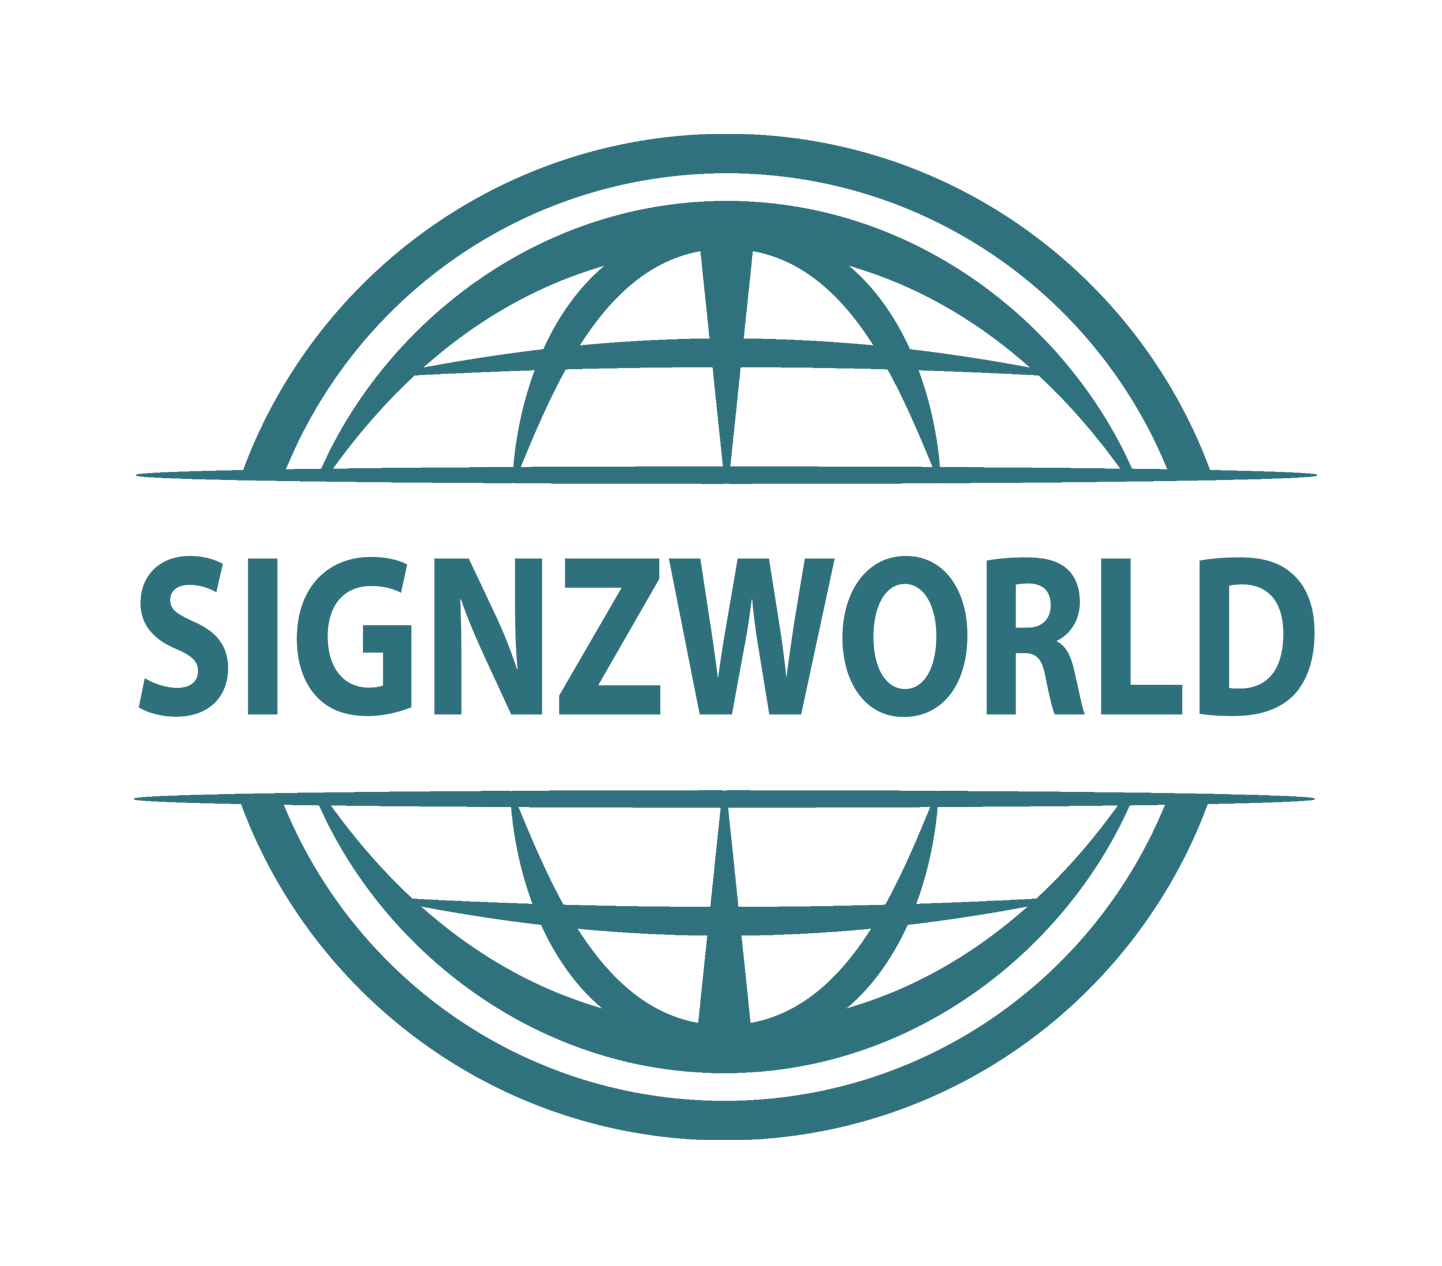 Signzworld Help Center home page